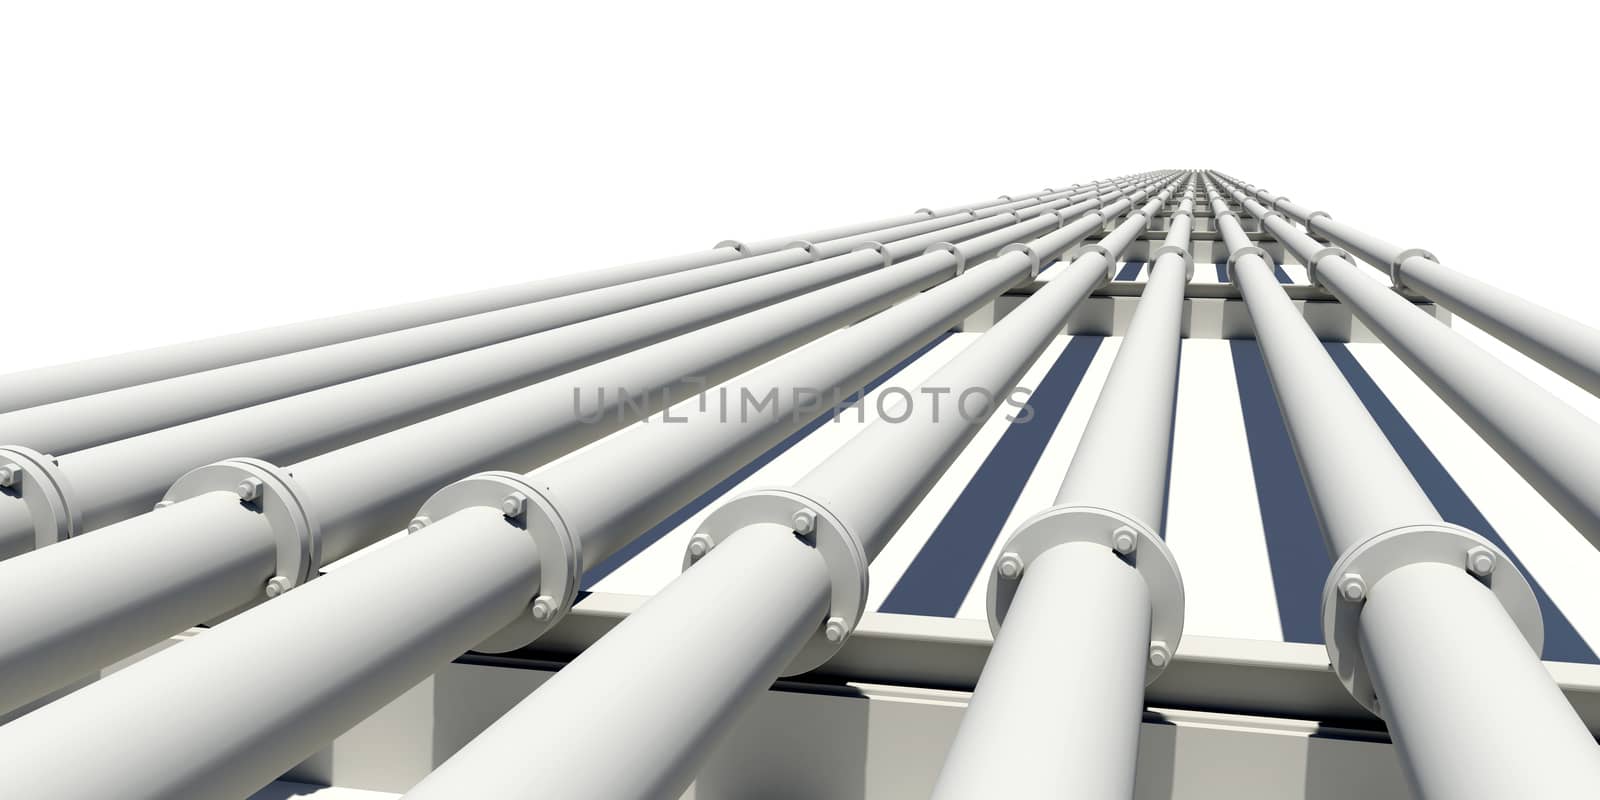 Many white industrial pipes stretching into distance. Isolated on white background. Industrial concept